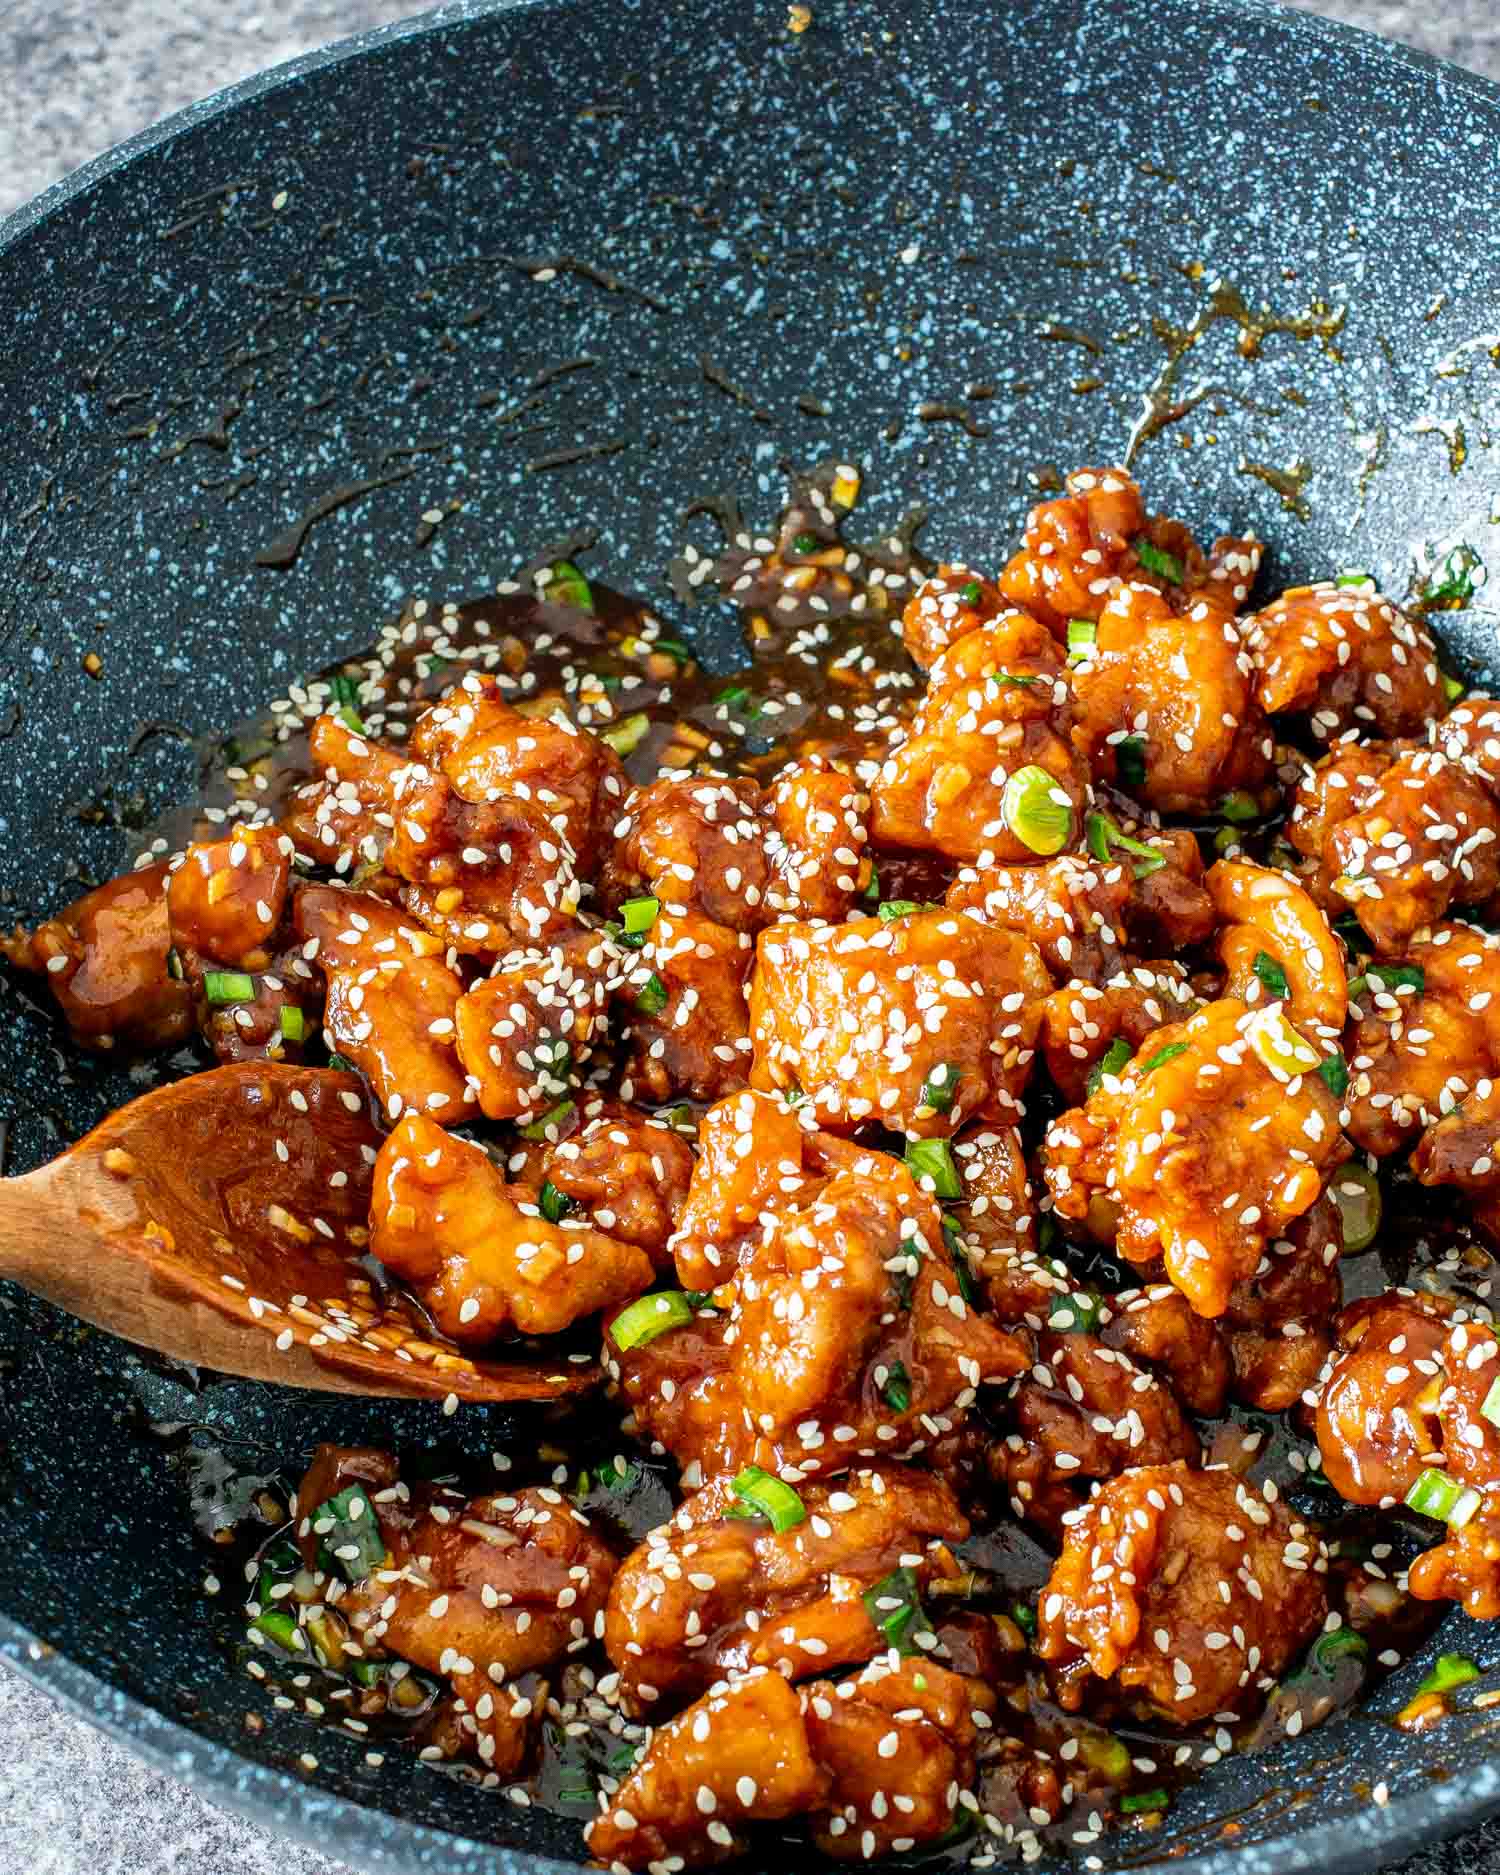 freshly made general tso's chicken in a wok.